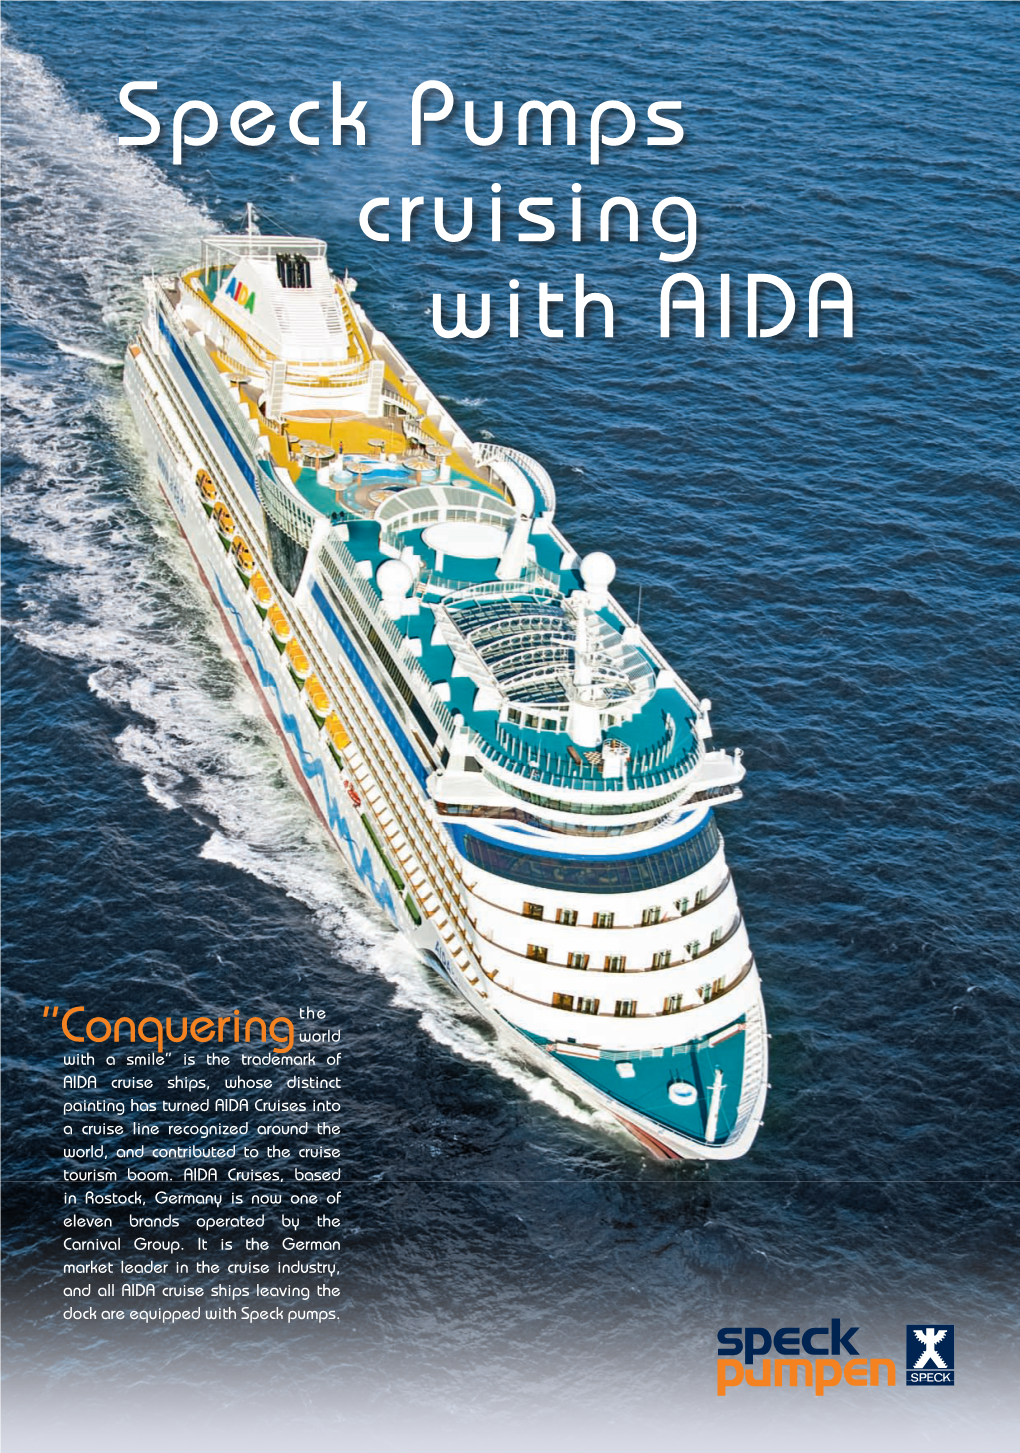 Speck Pumps Cruising with AIDA Placesf O Relaxation and Enjoyment: Every AIDA Cruise Ship Offers As Many As Five Jacuzzis